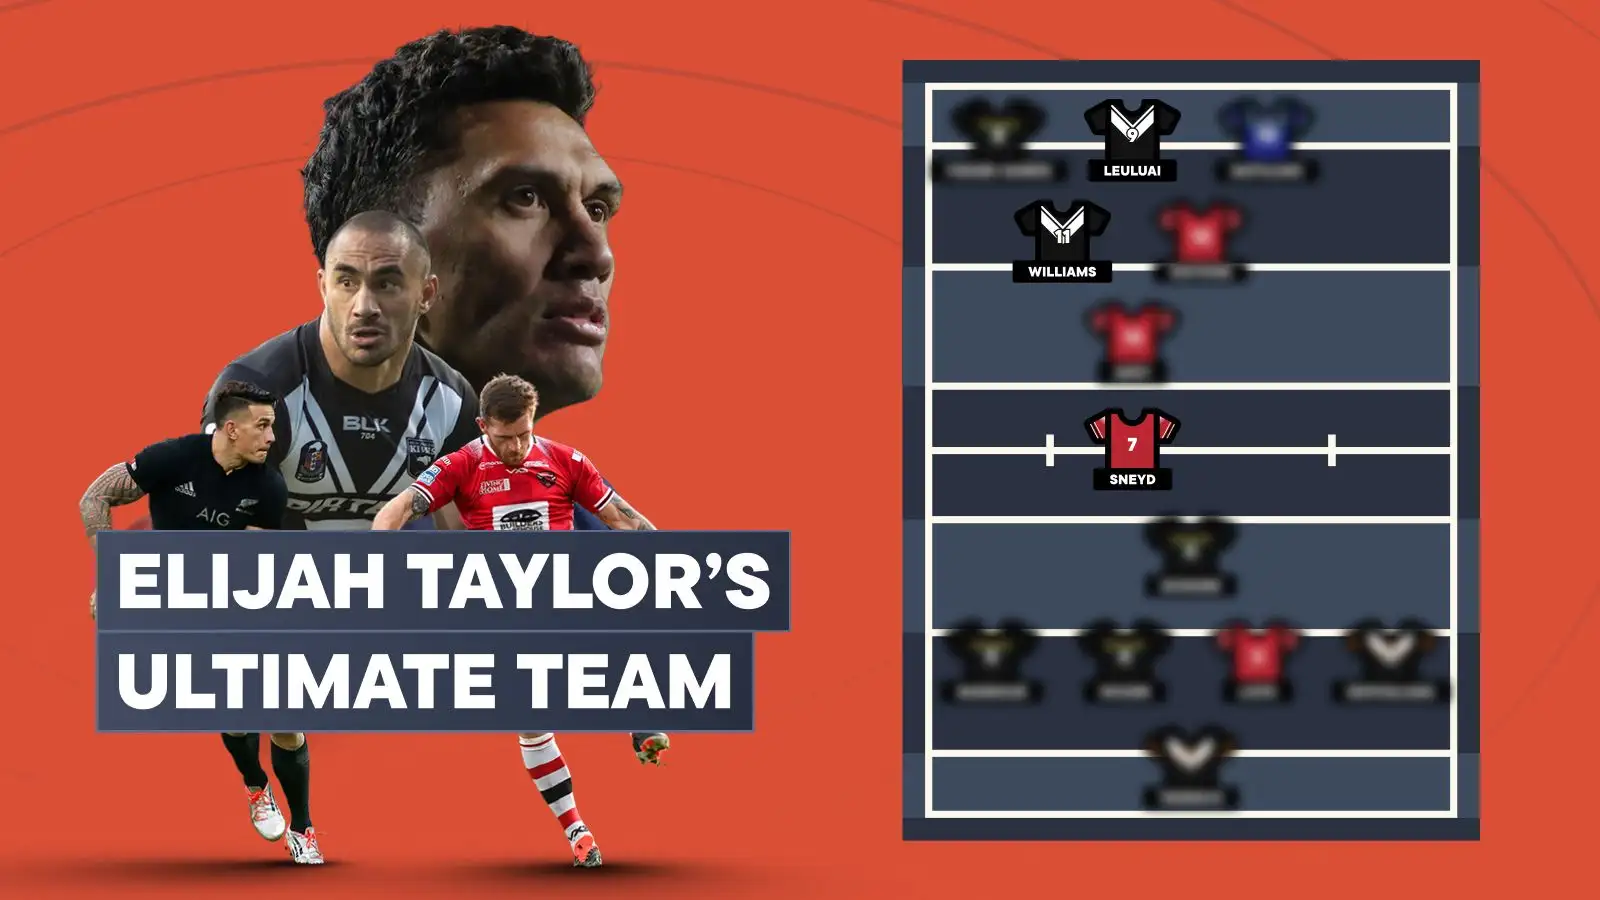 My Ultimate Team: Elijah Taylor names his greatest 1-17 from players he played alongside